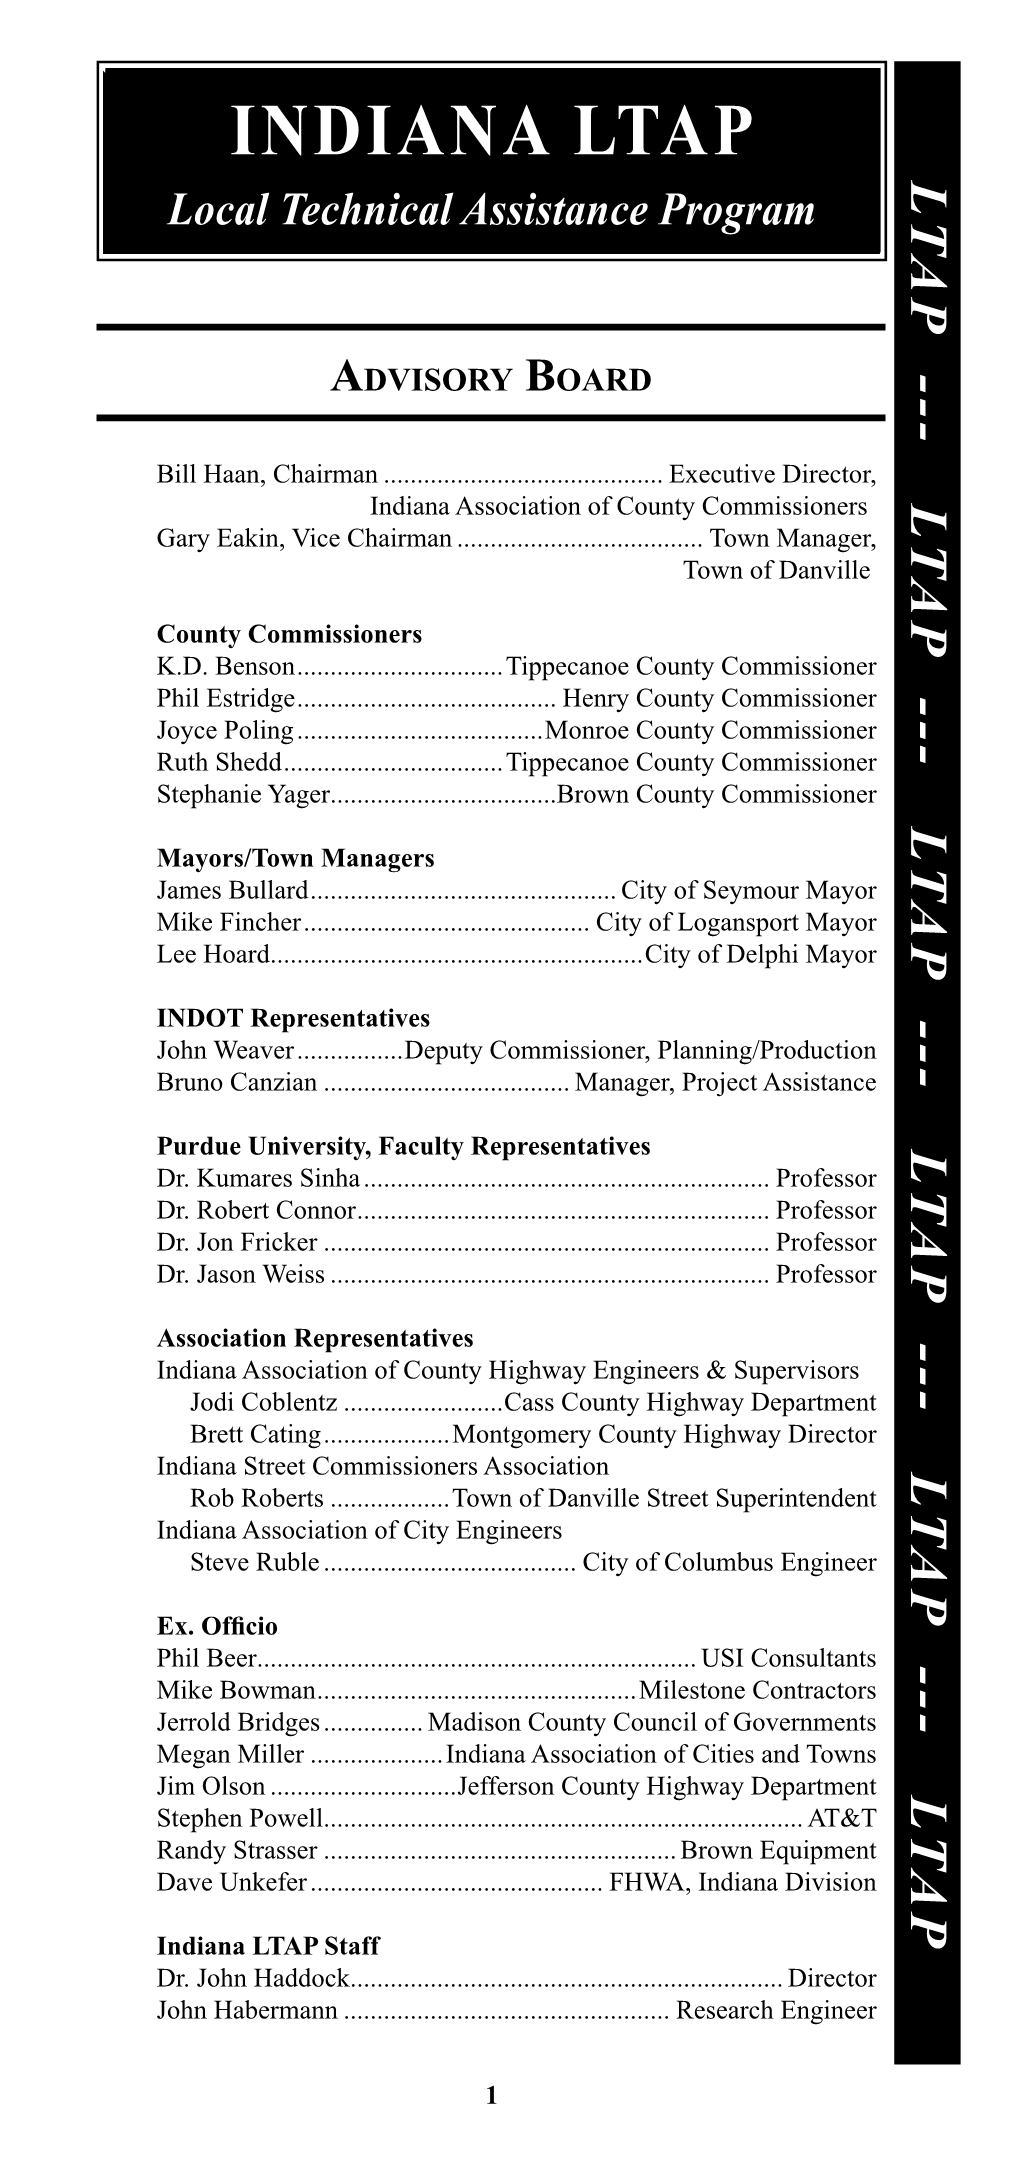 2007 Directory of Indiana State, County, City and Town Officials